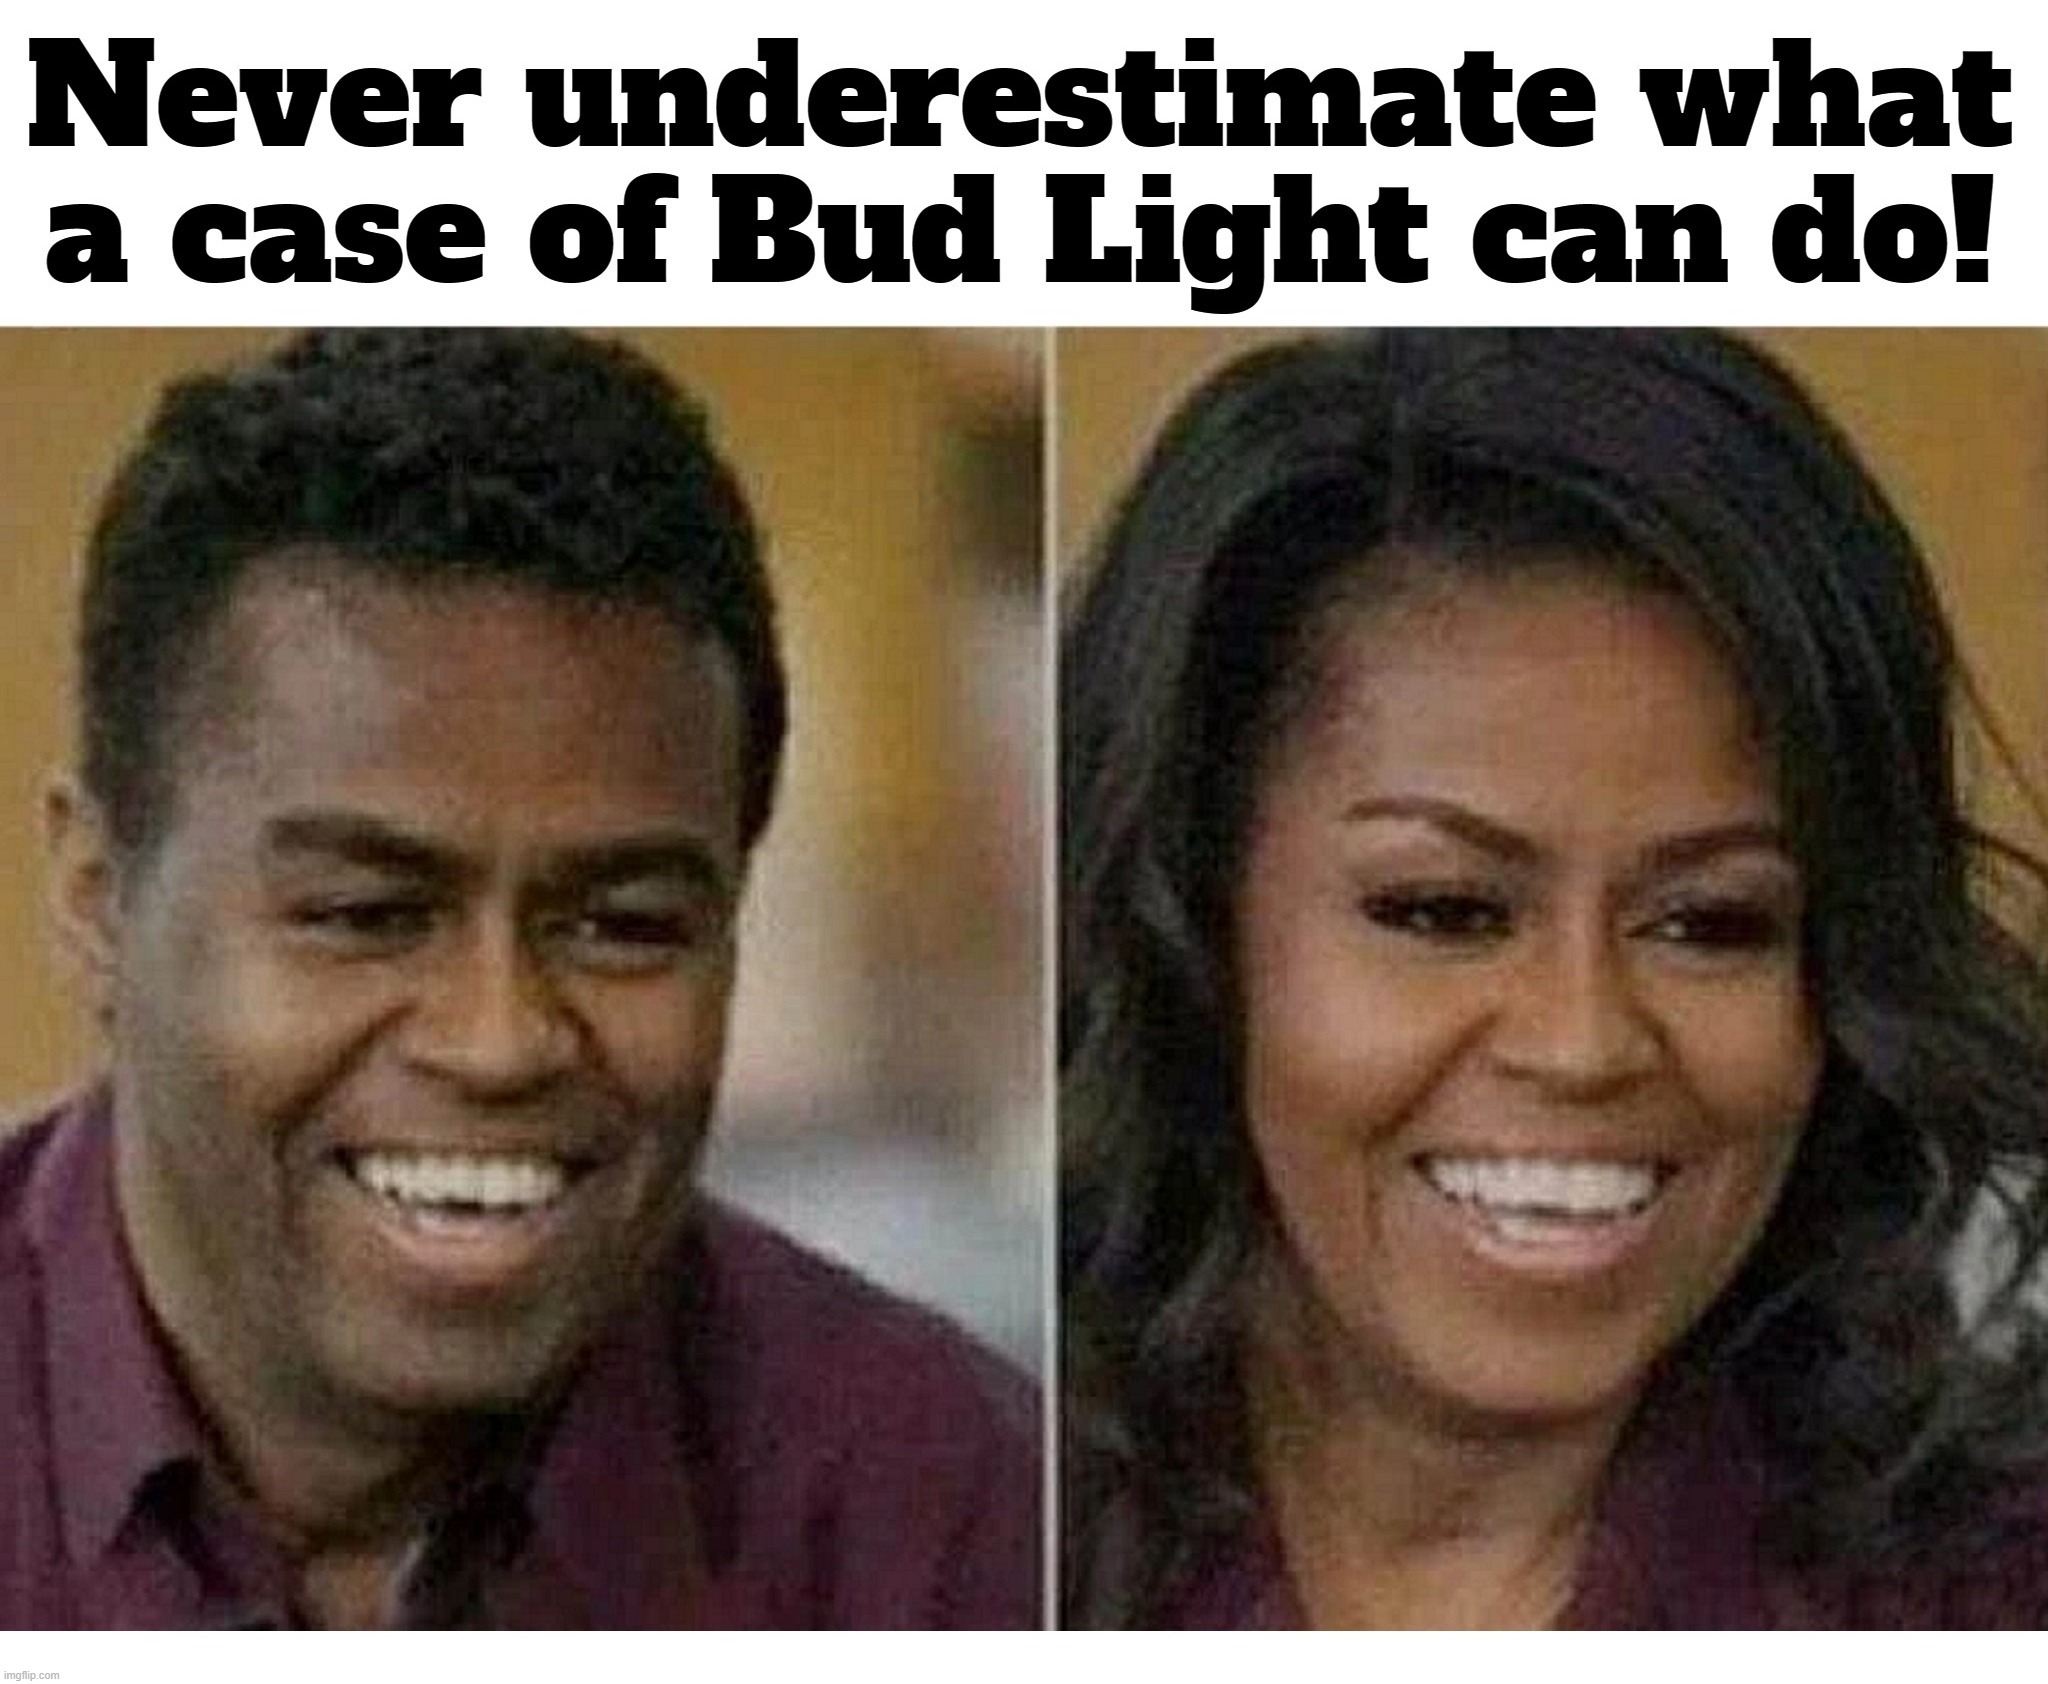 Never underestimate what a case of Bud Light can do! | image tagged in bud light,tranny fluid,moochelle,big mike,michelle obama,michael lavaughn robinson | made w/ Imgflip meme maker